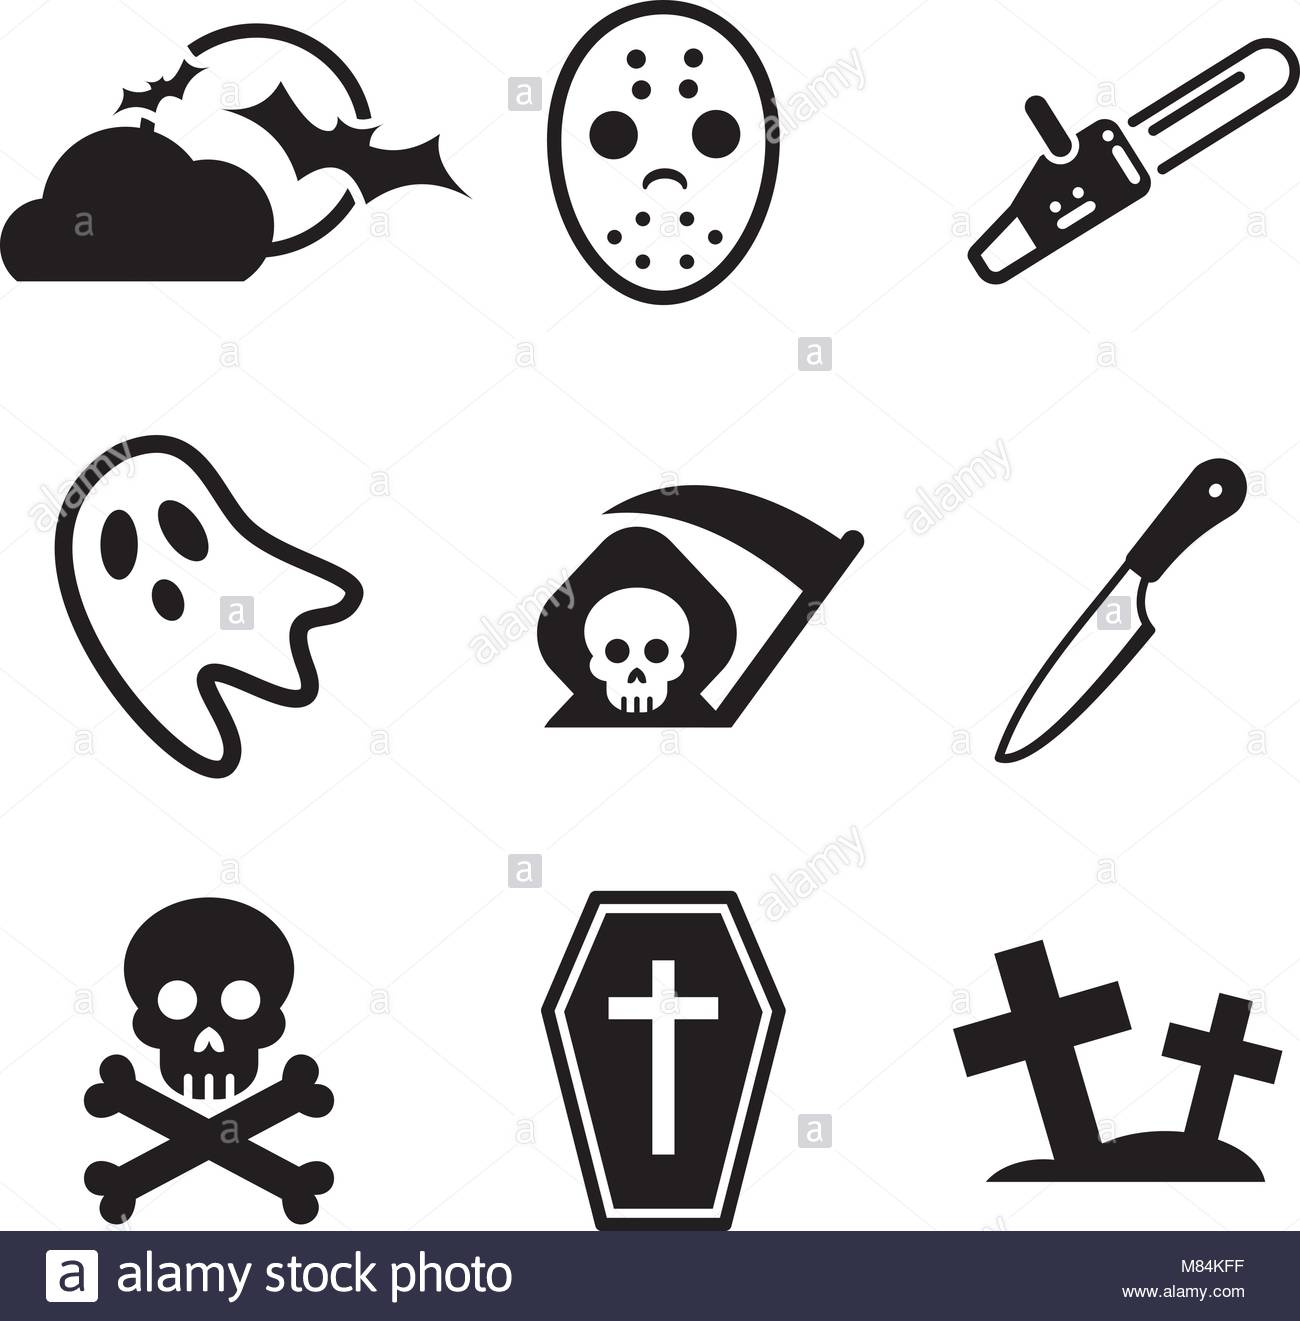 Horror Icons - Download 22 Free Horror icons here